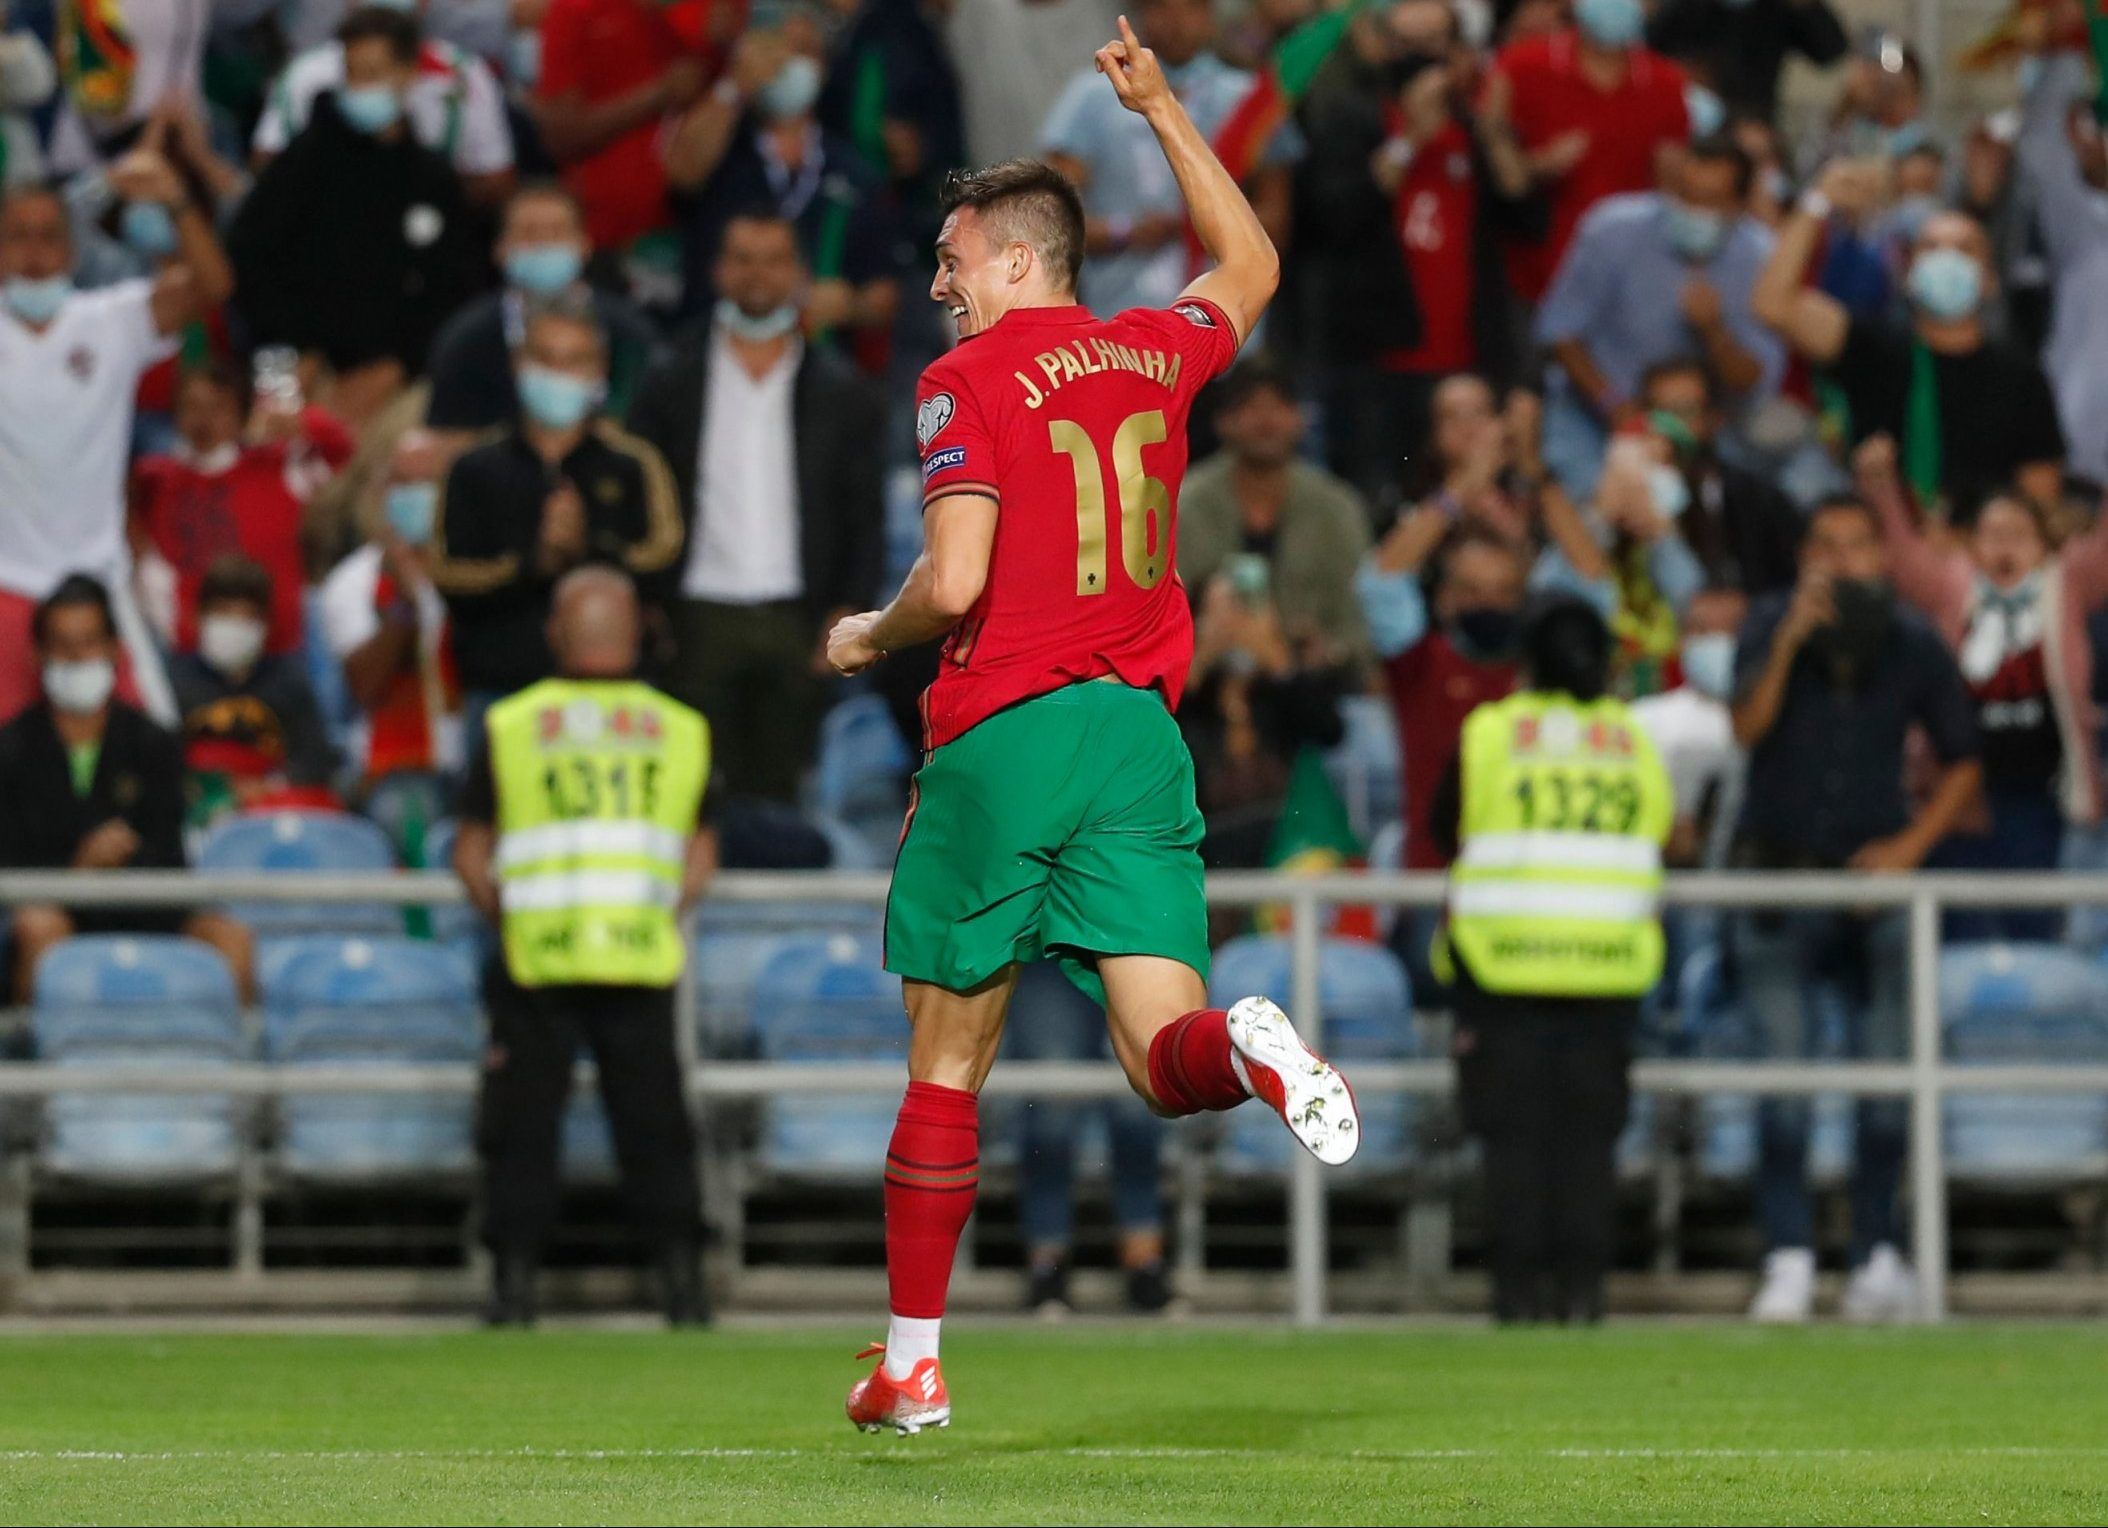 Sporting Lisbon midfielder Joao Palhinha in action for Portugal against Luxembourg